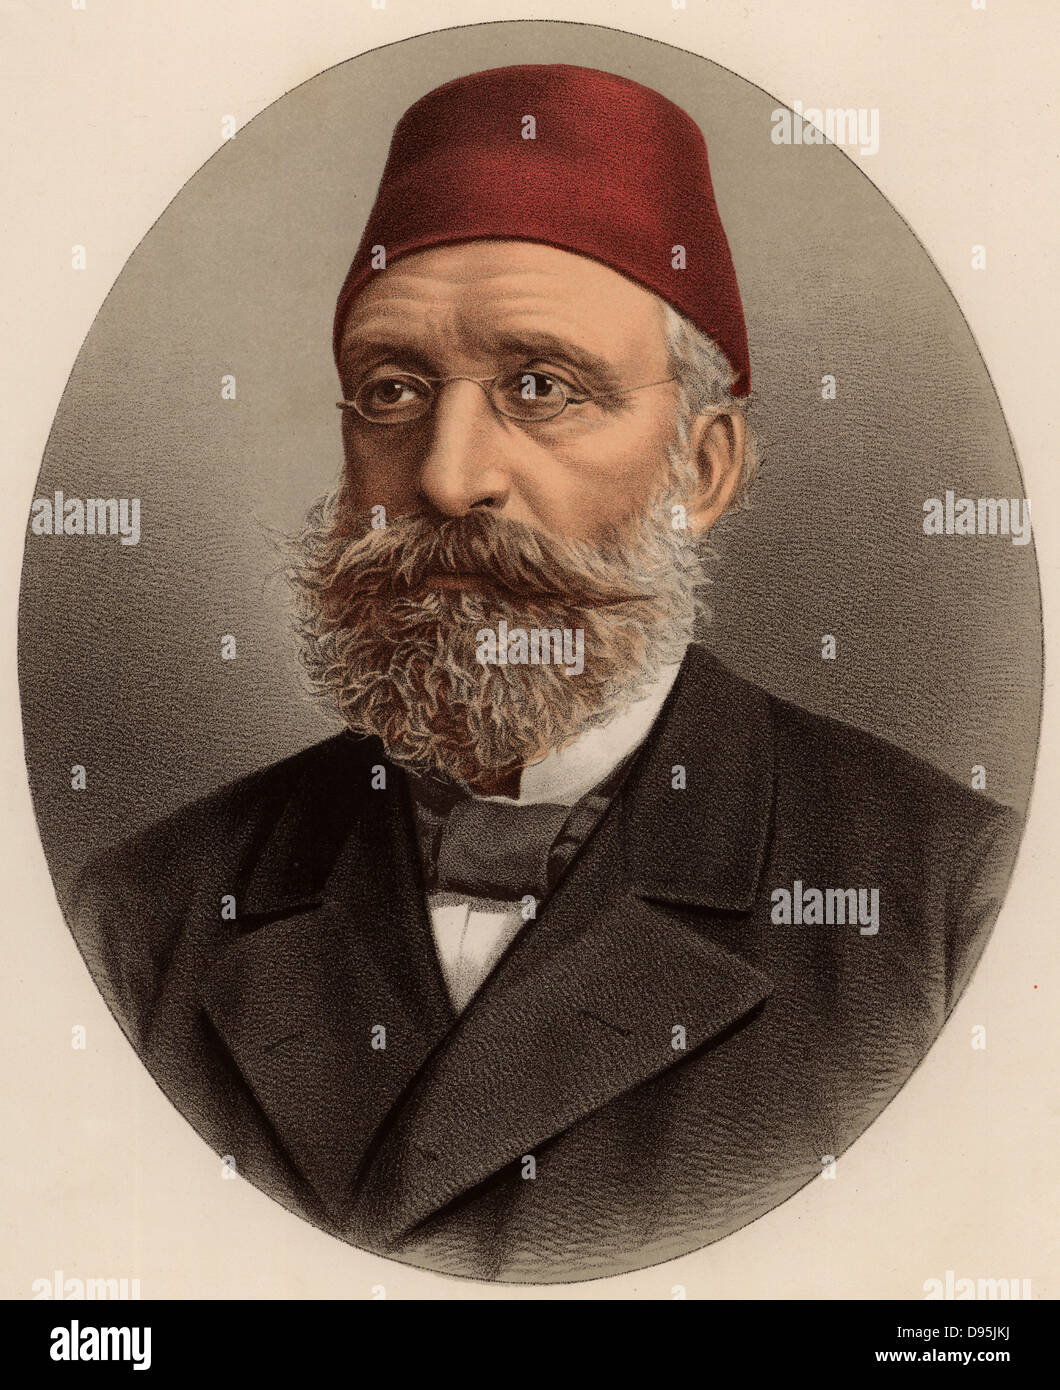 Midhat Pasha (1822-1883), Turkish politician, governor of Bulgaria (1864-1869).  In 1876 he led the revolution deposing the tyrant Abd-al-Aziz. In 1883 he was charged with the murder of Abd-al-Aziz, imprisoned and strangled. From 'The Modern Portrait Gallery' (London, c1880). Stock Photo